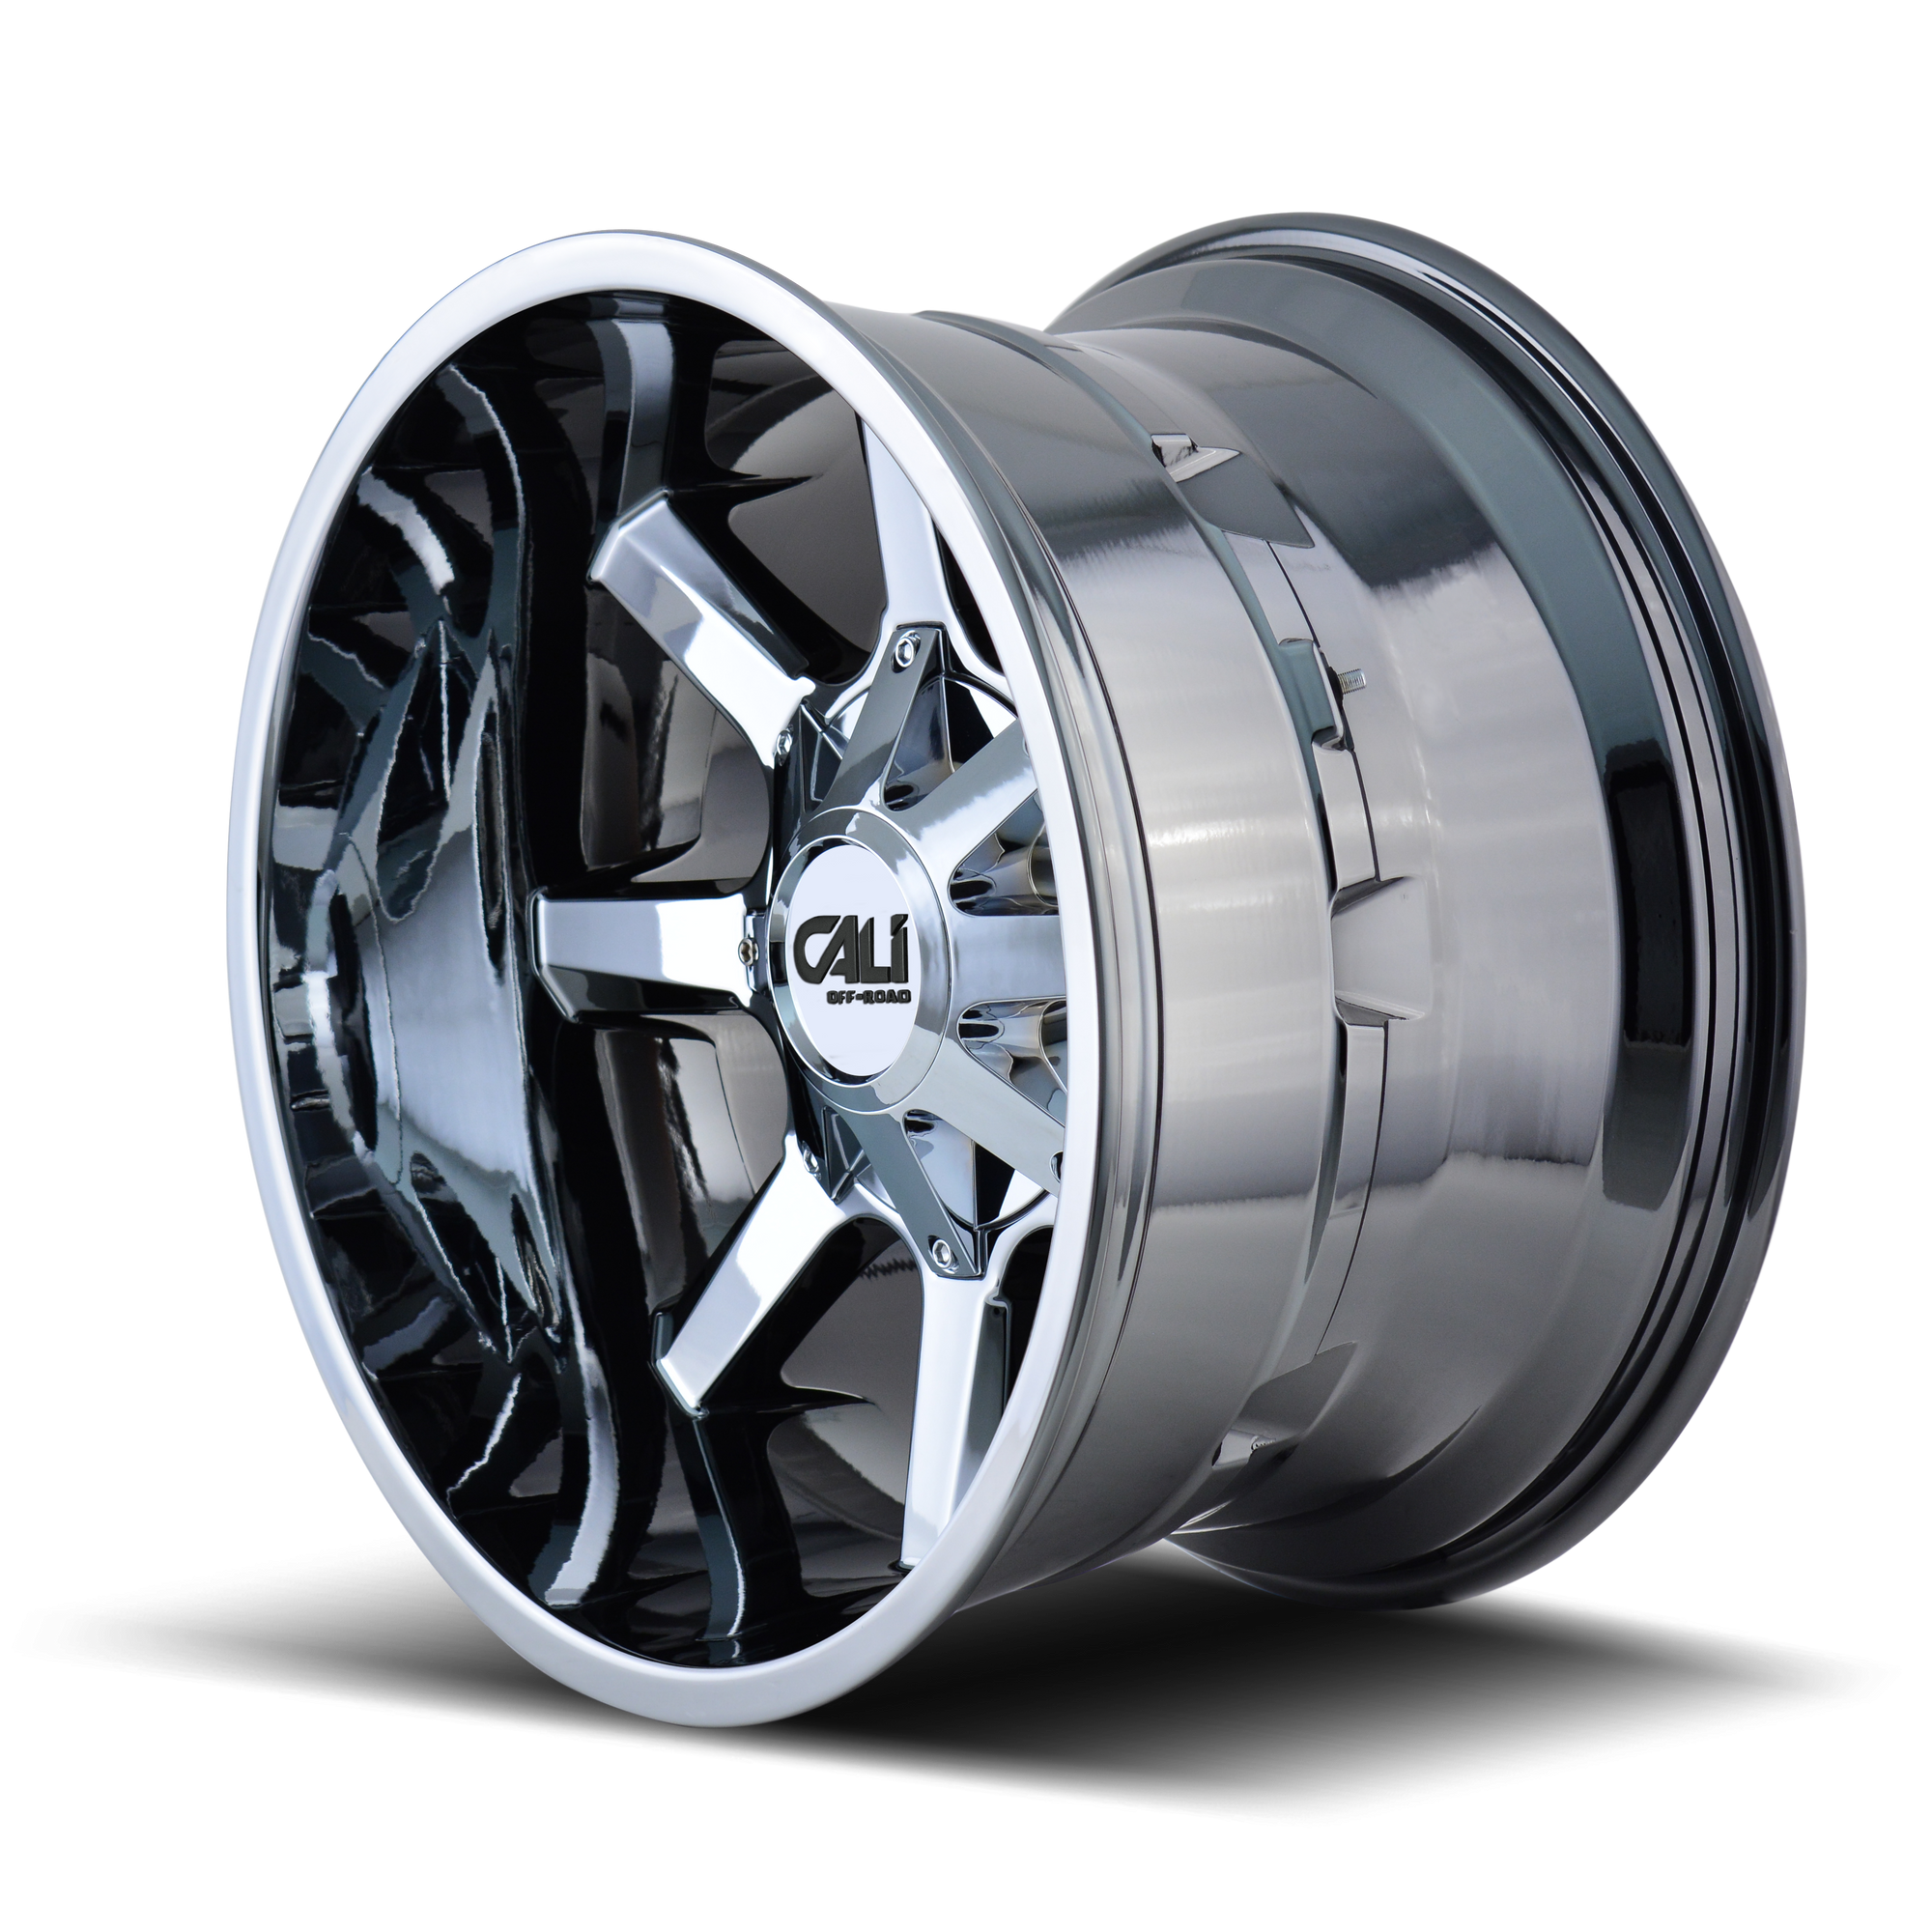 Cali Off-road BUSTED Chrome 20x9 0 6x135|6x139.7mm 106mm